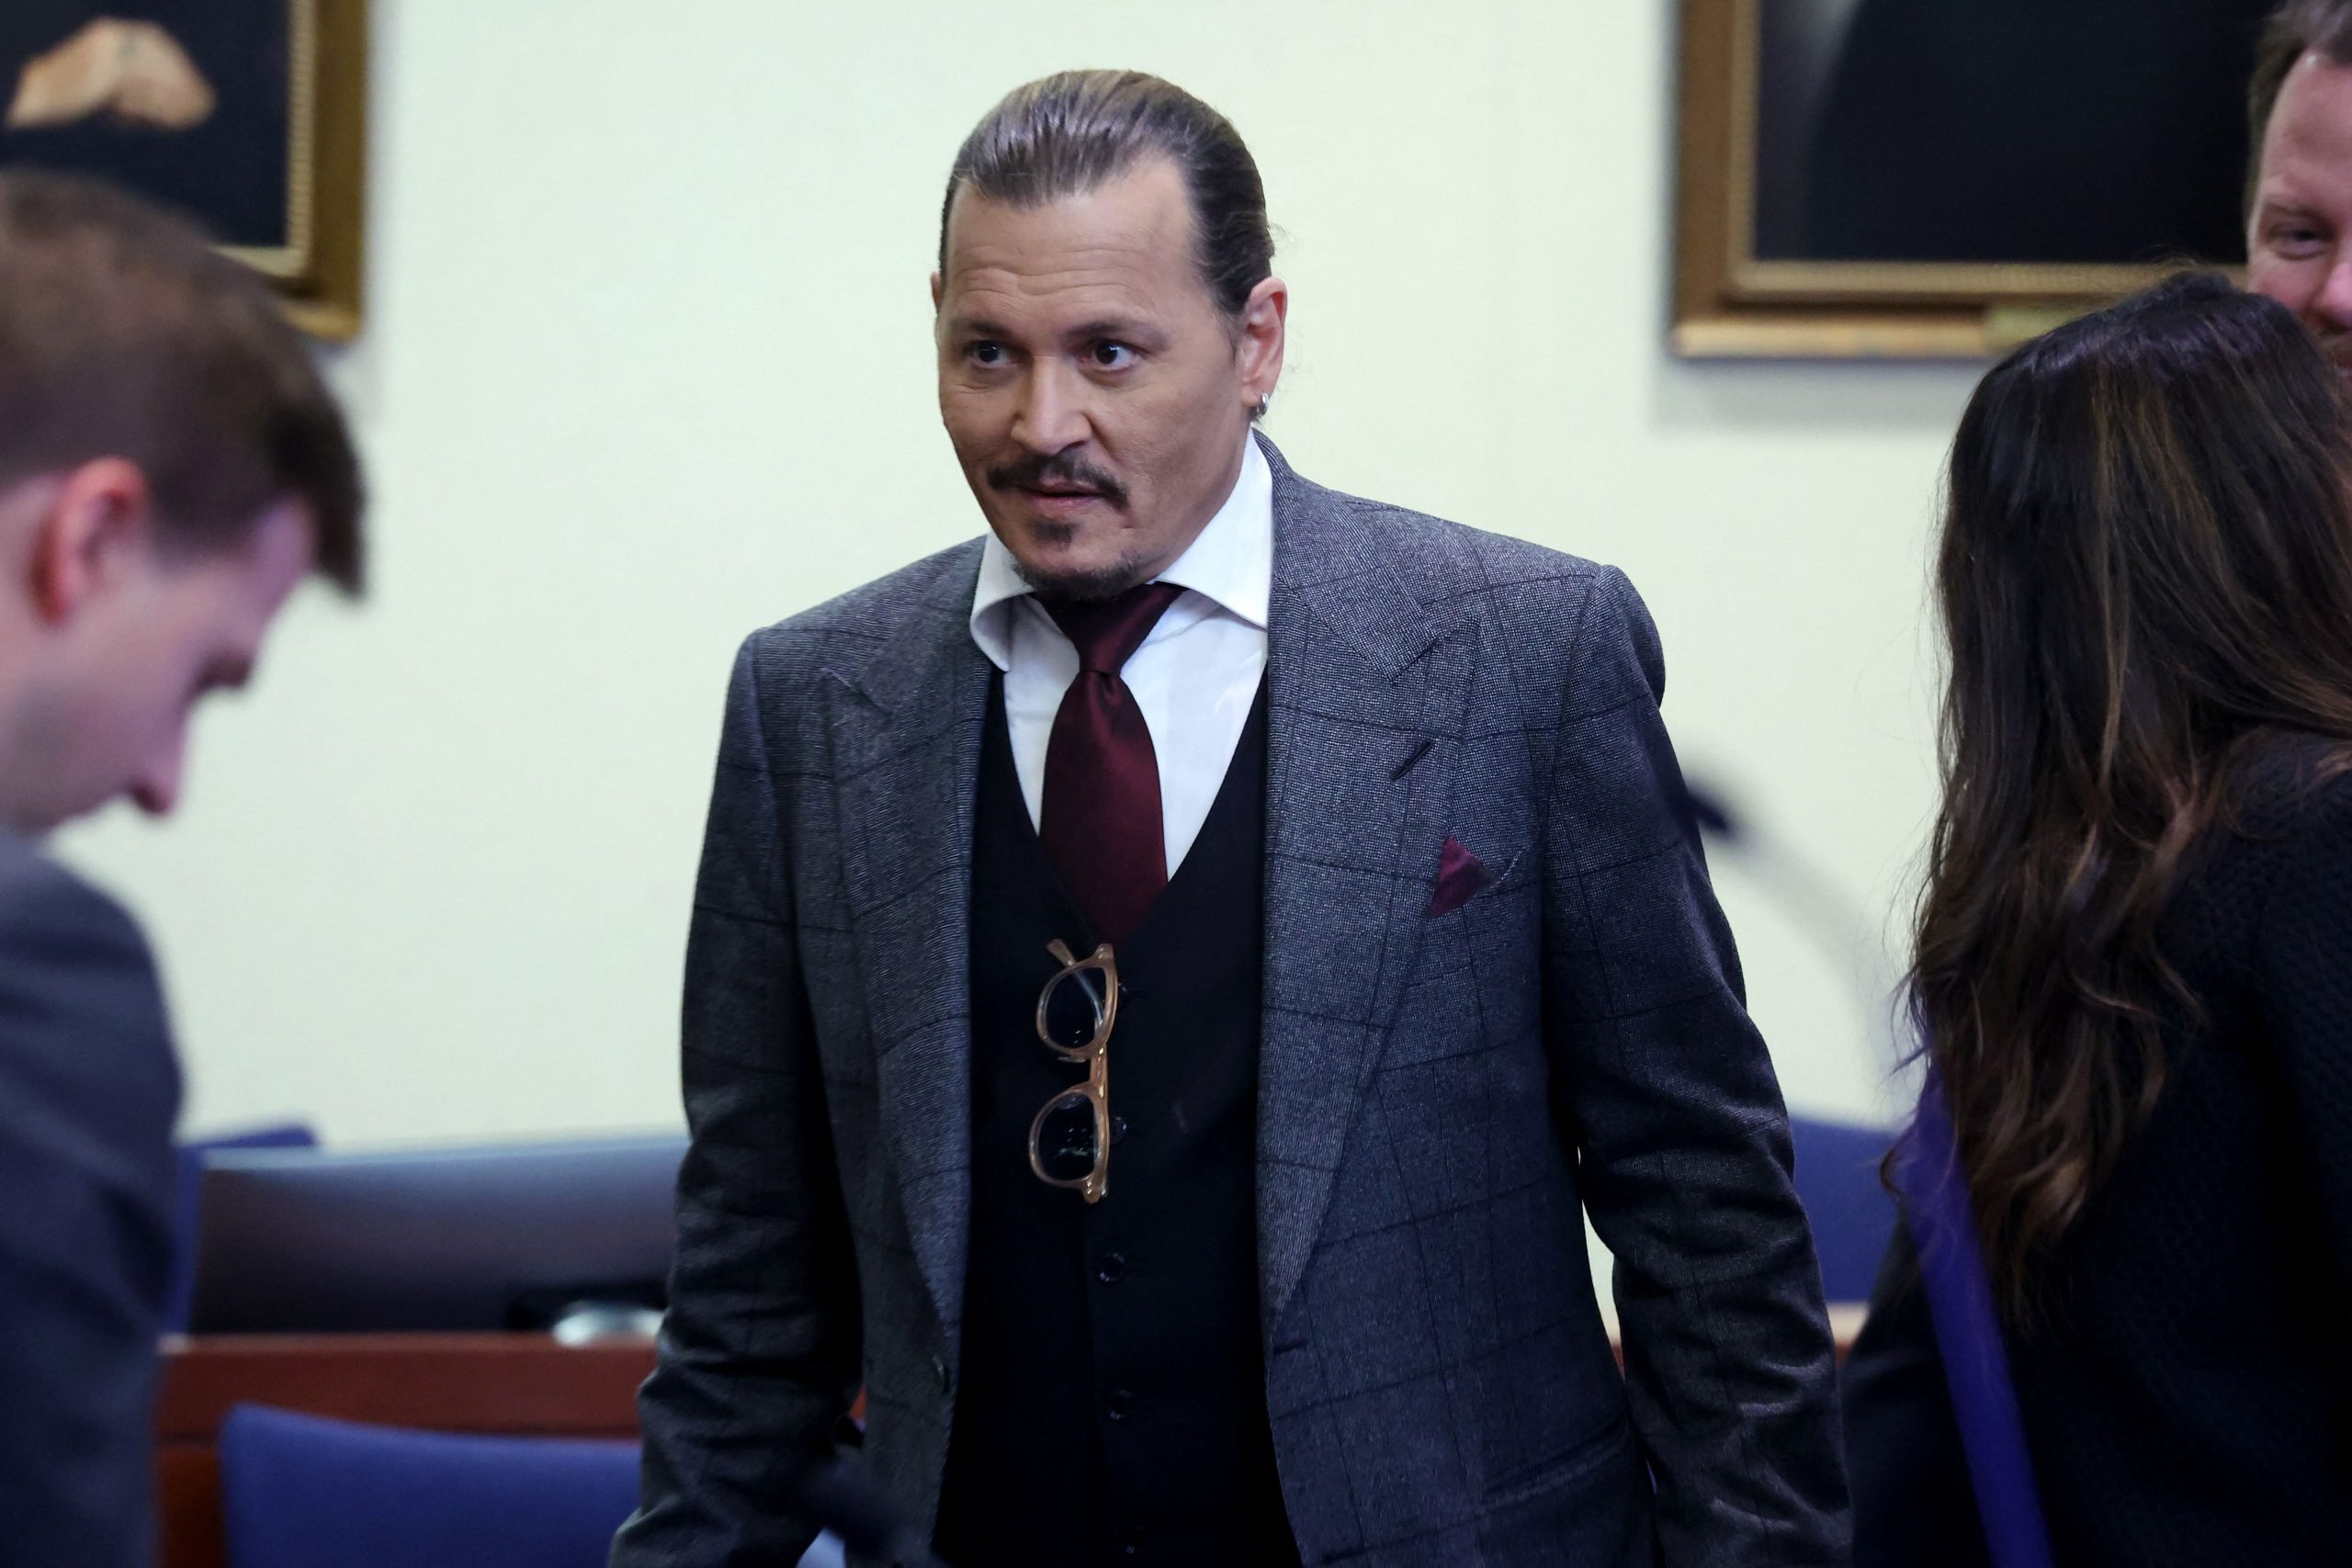 Johnny Depp was eating candy in court